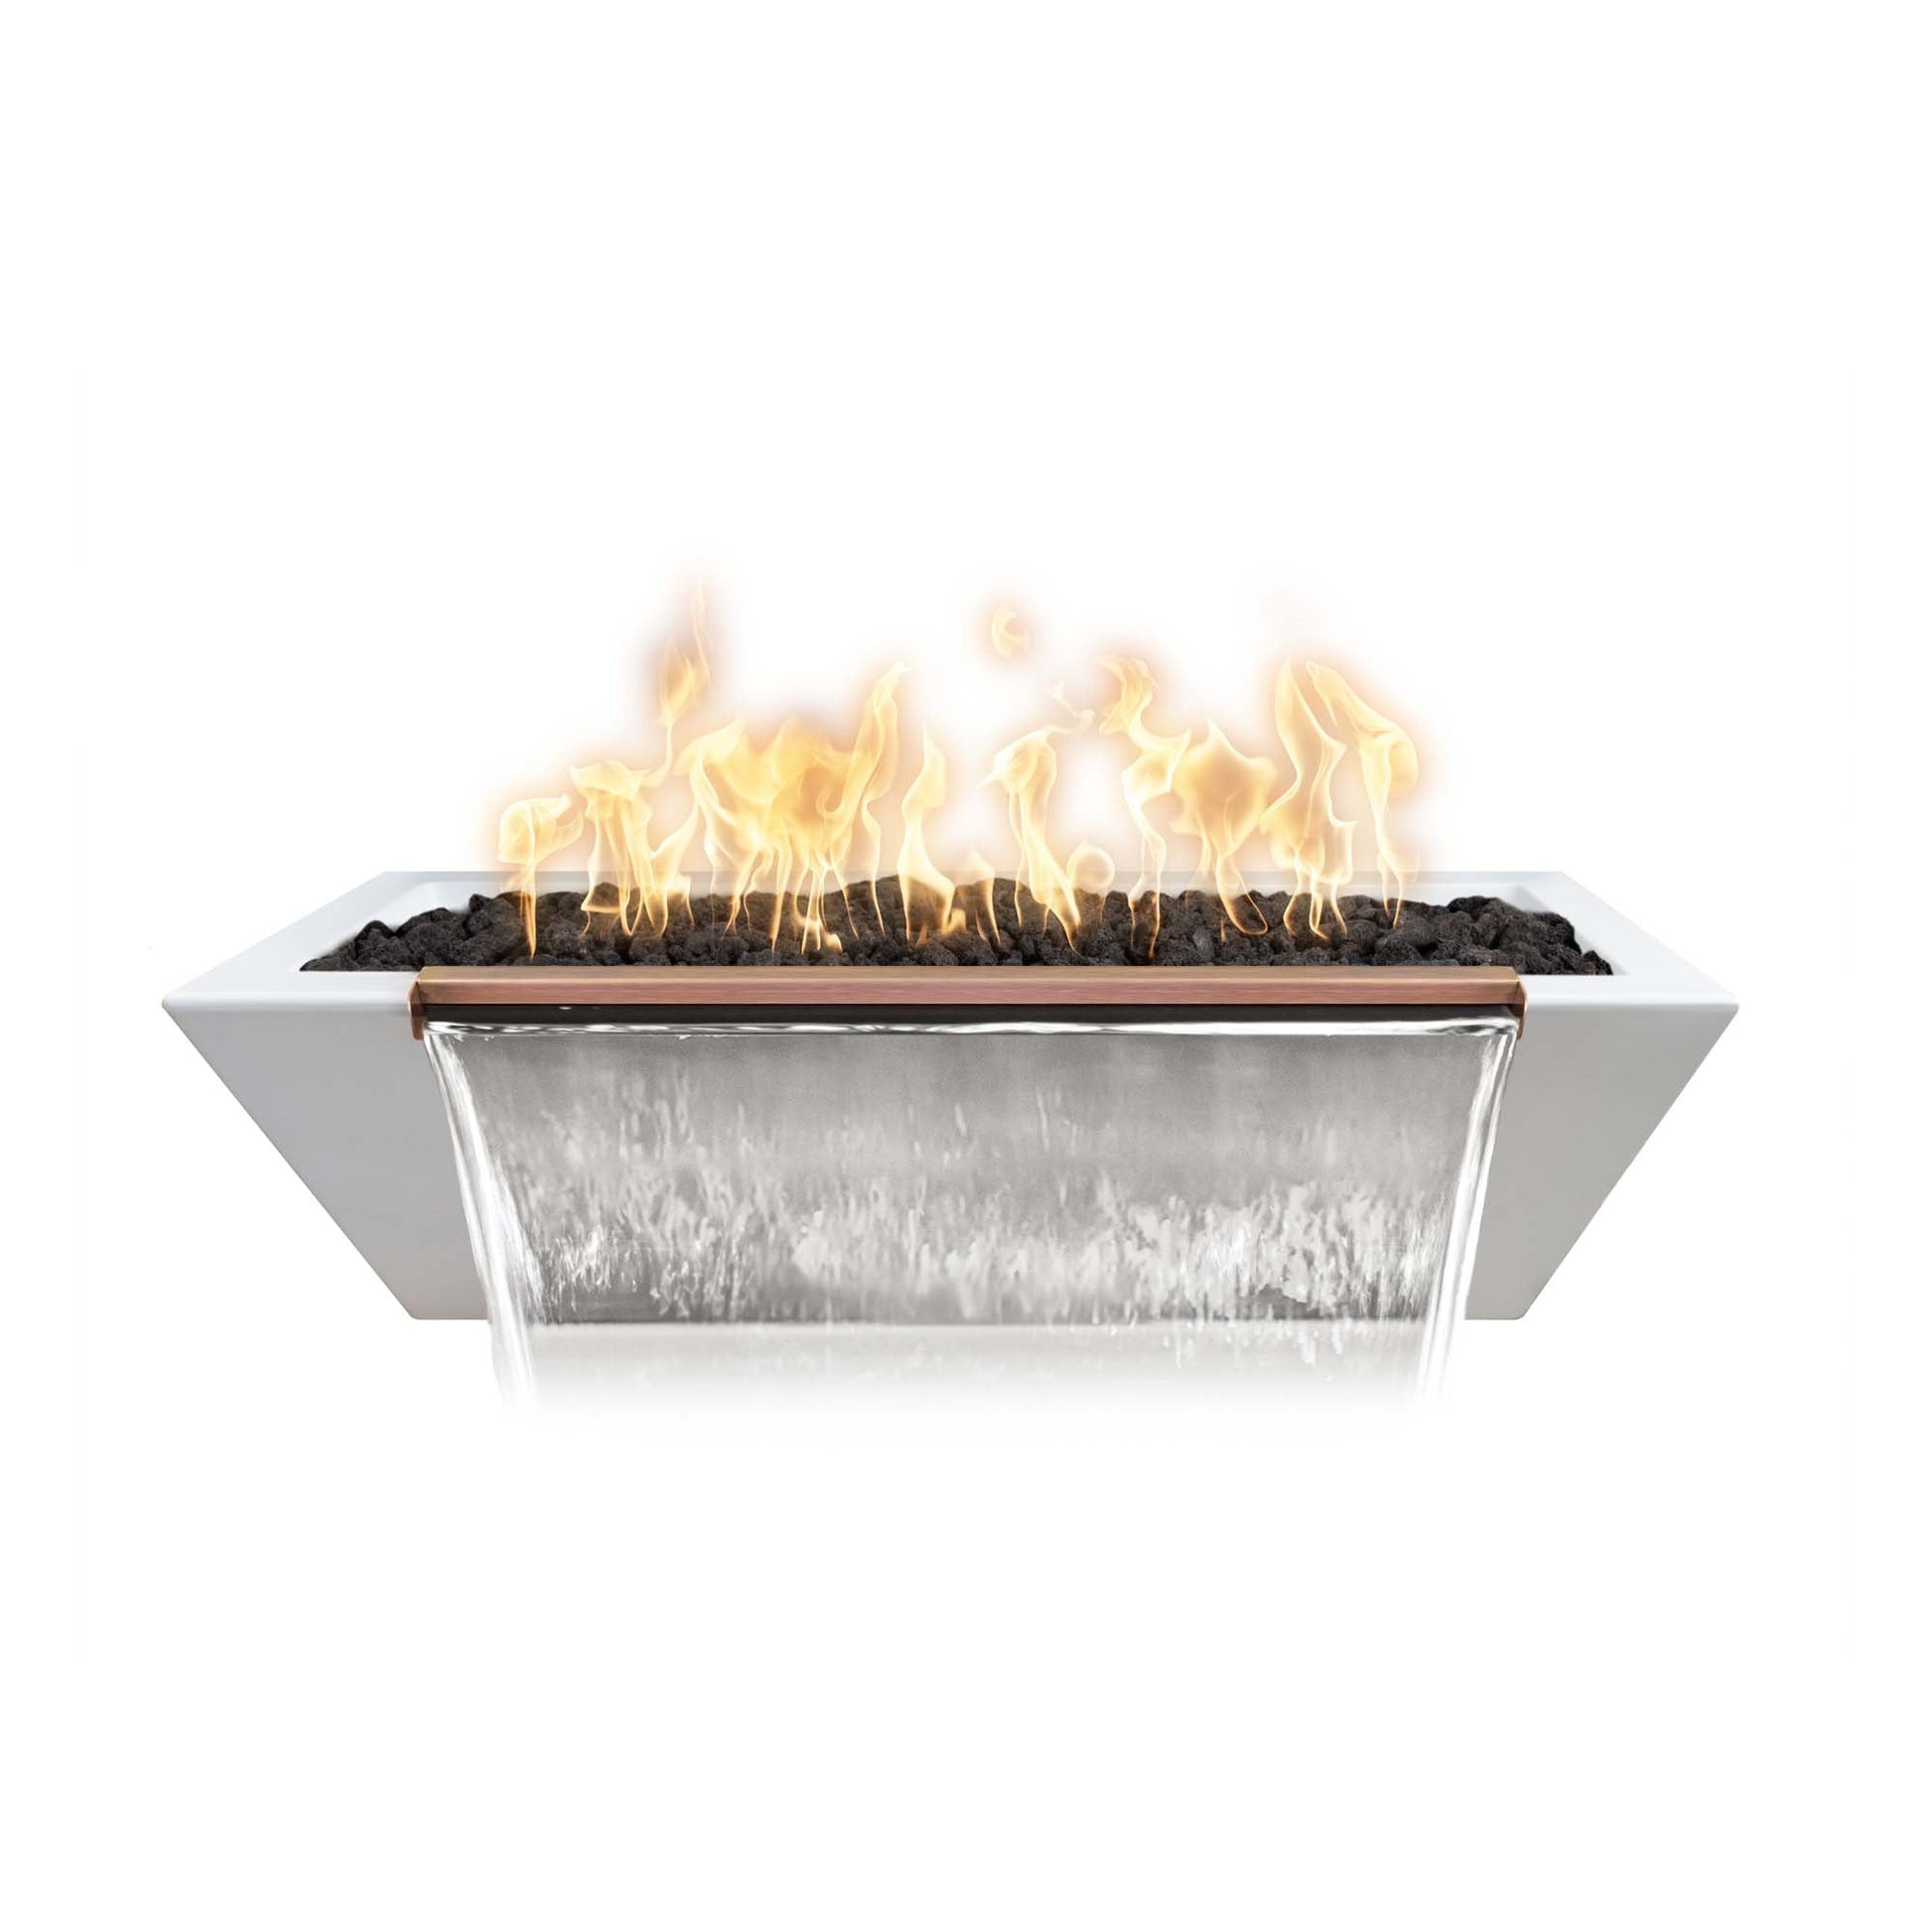 The Outdoor Plus Linear Maya 60" Rustic White GFRC Concrete Liquid Propane Fire & Water Bowl with 12V Electronic Ignition